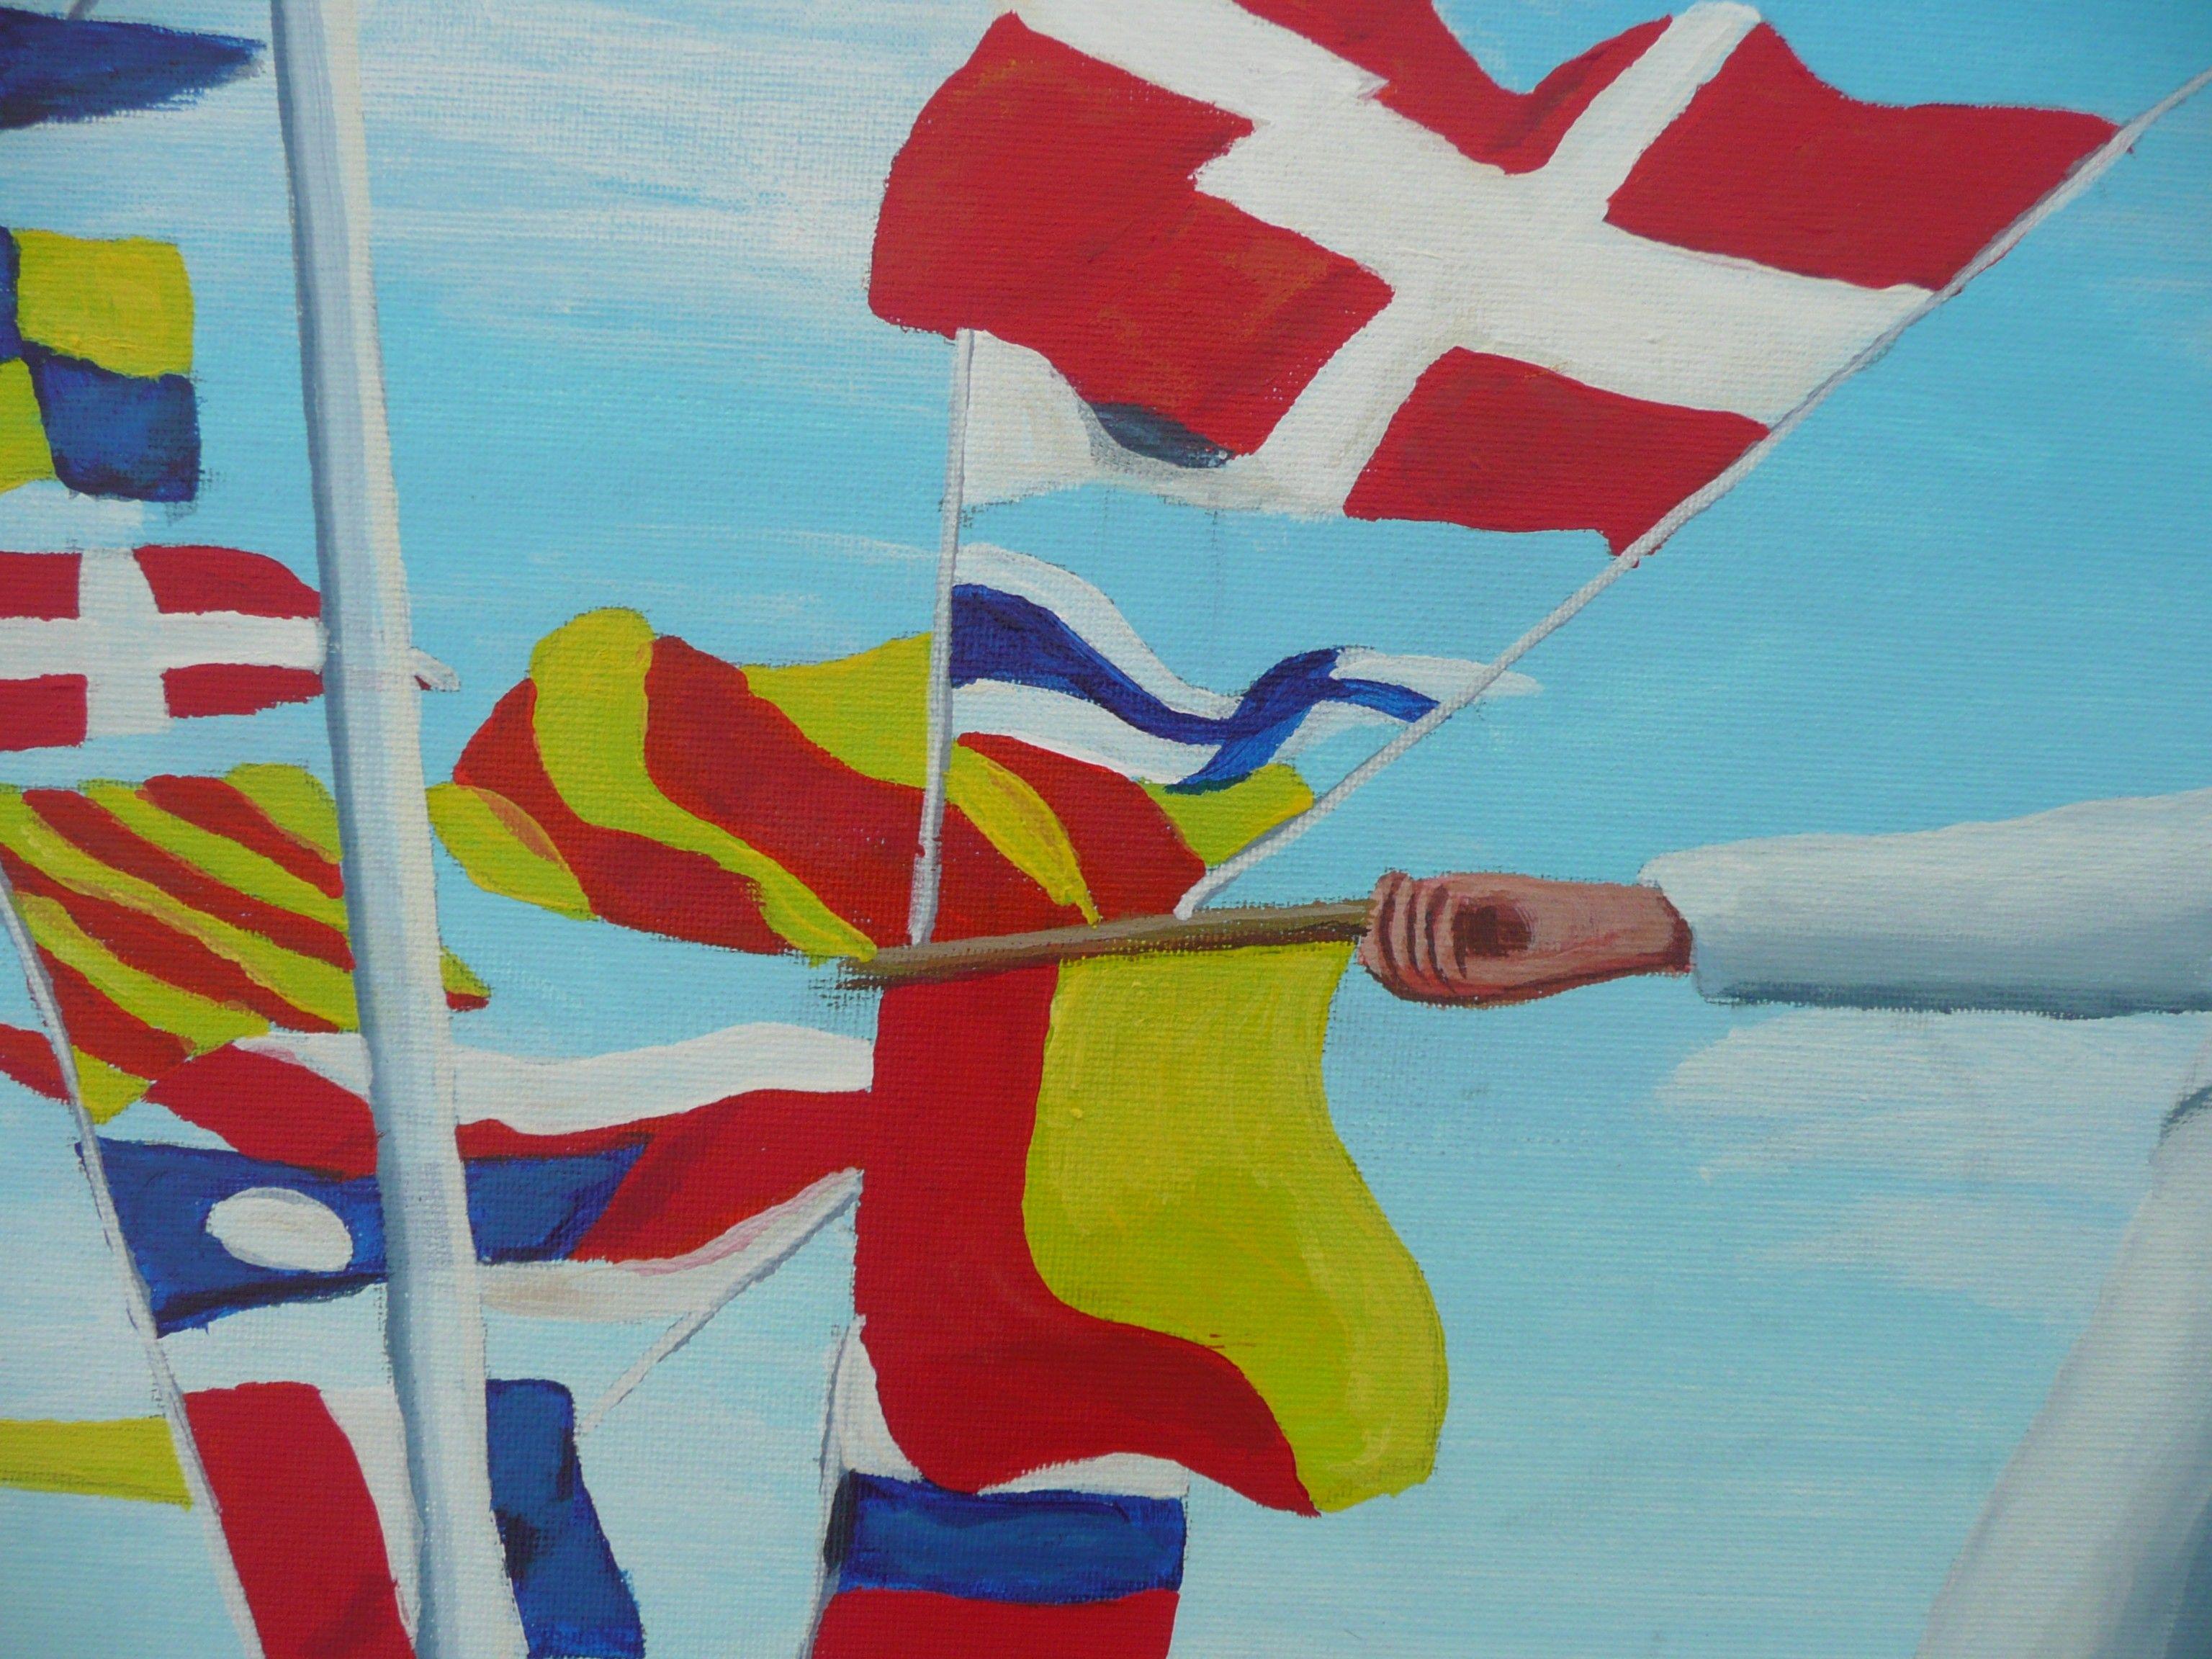 A Naval Signalman is sending a message via semaphore flags in front of a background of flying signal flags. This is a bright and cheerful scene which will enliven your day and mood. This nautical painting has been created using only professional